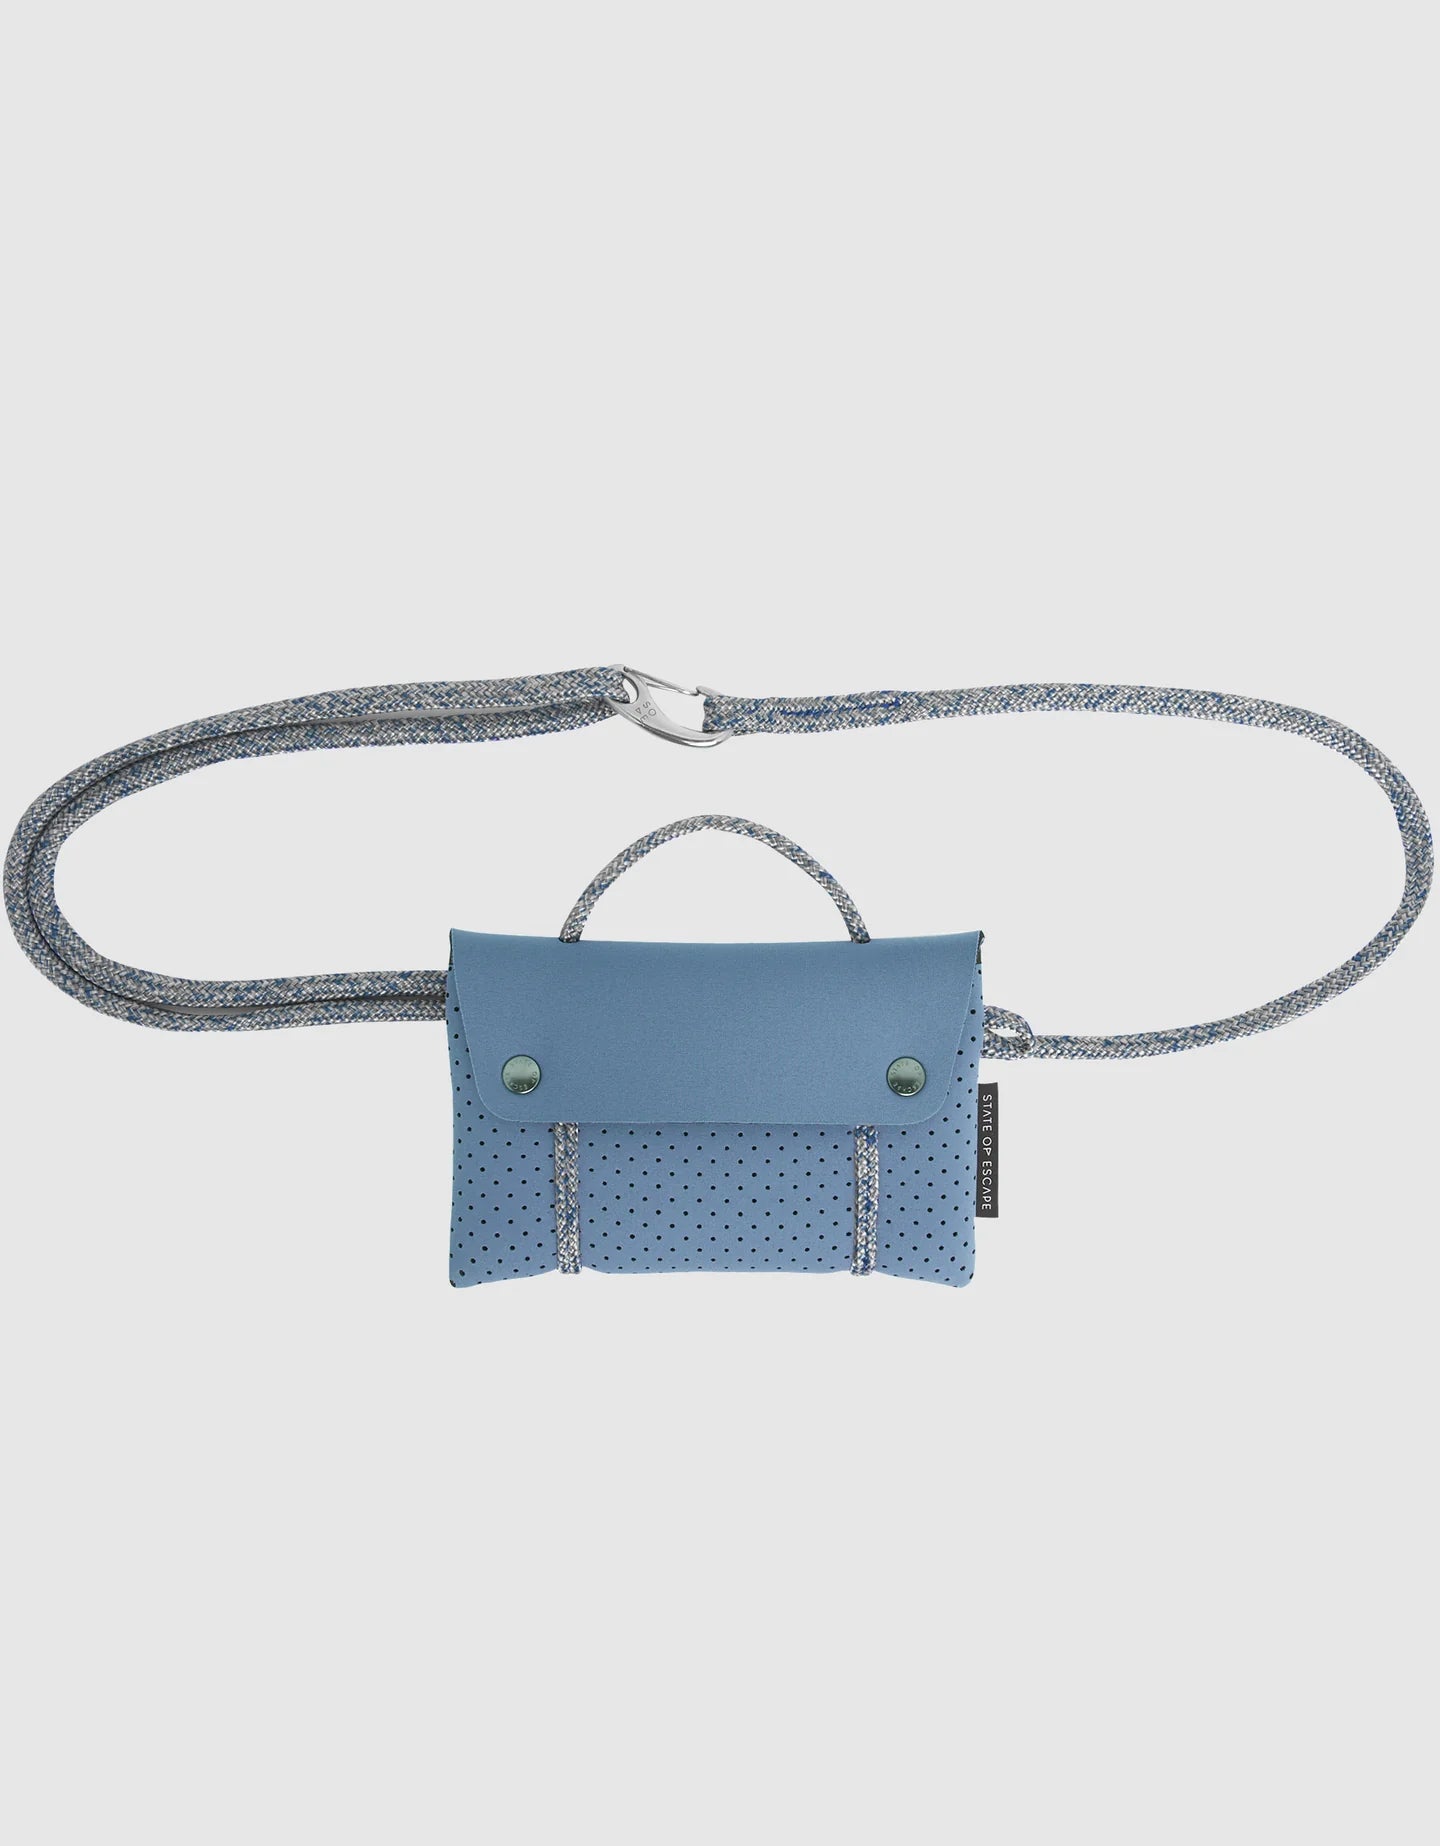 COMPASS BELT BAG - WASHED LAPIS - STATE OF ESCAPE